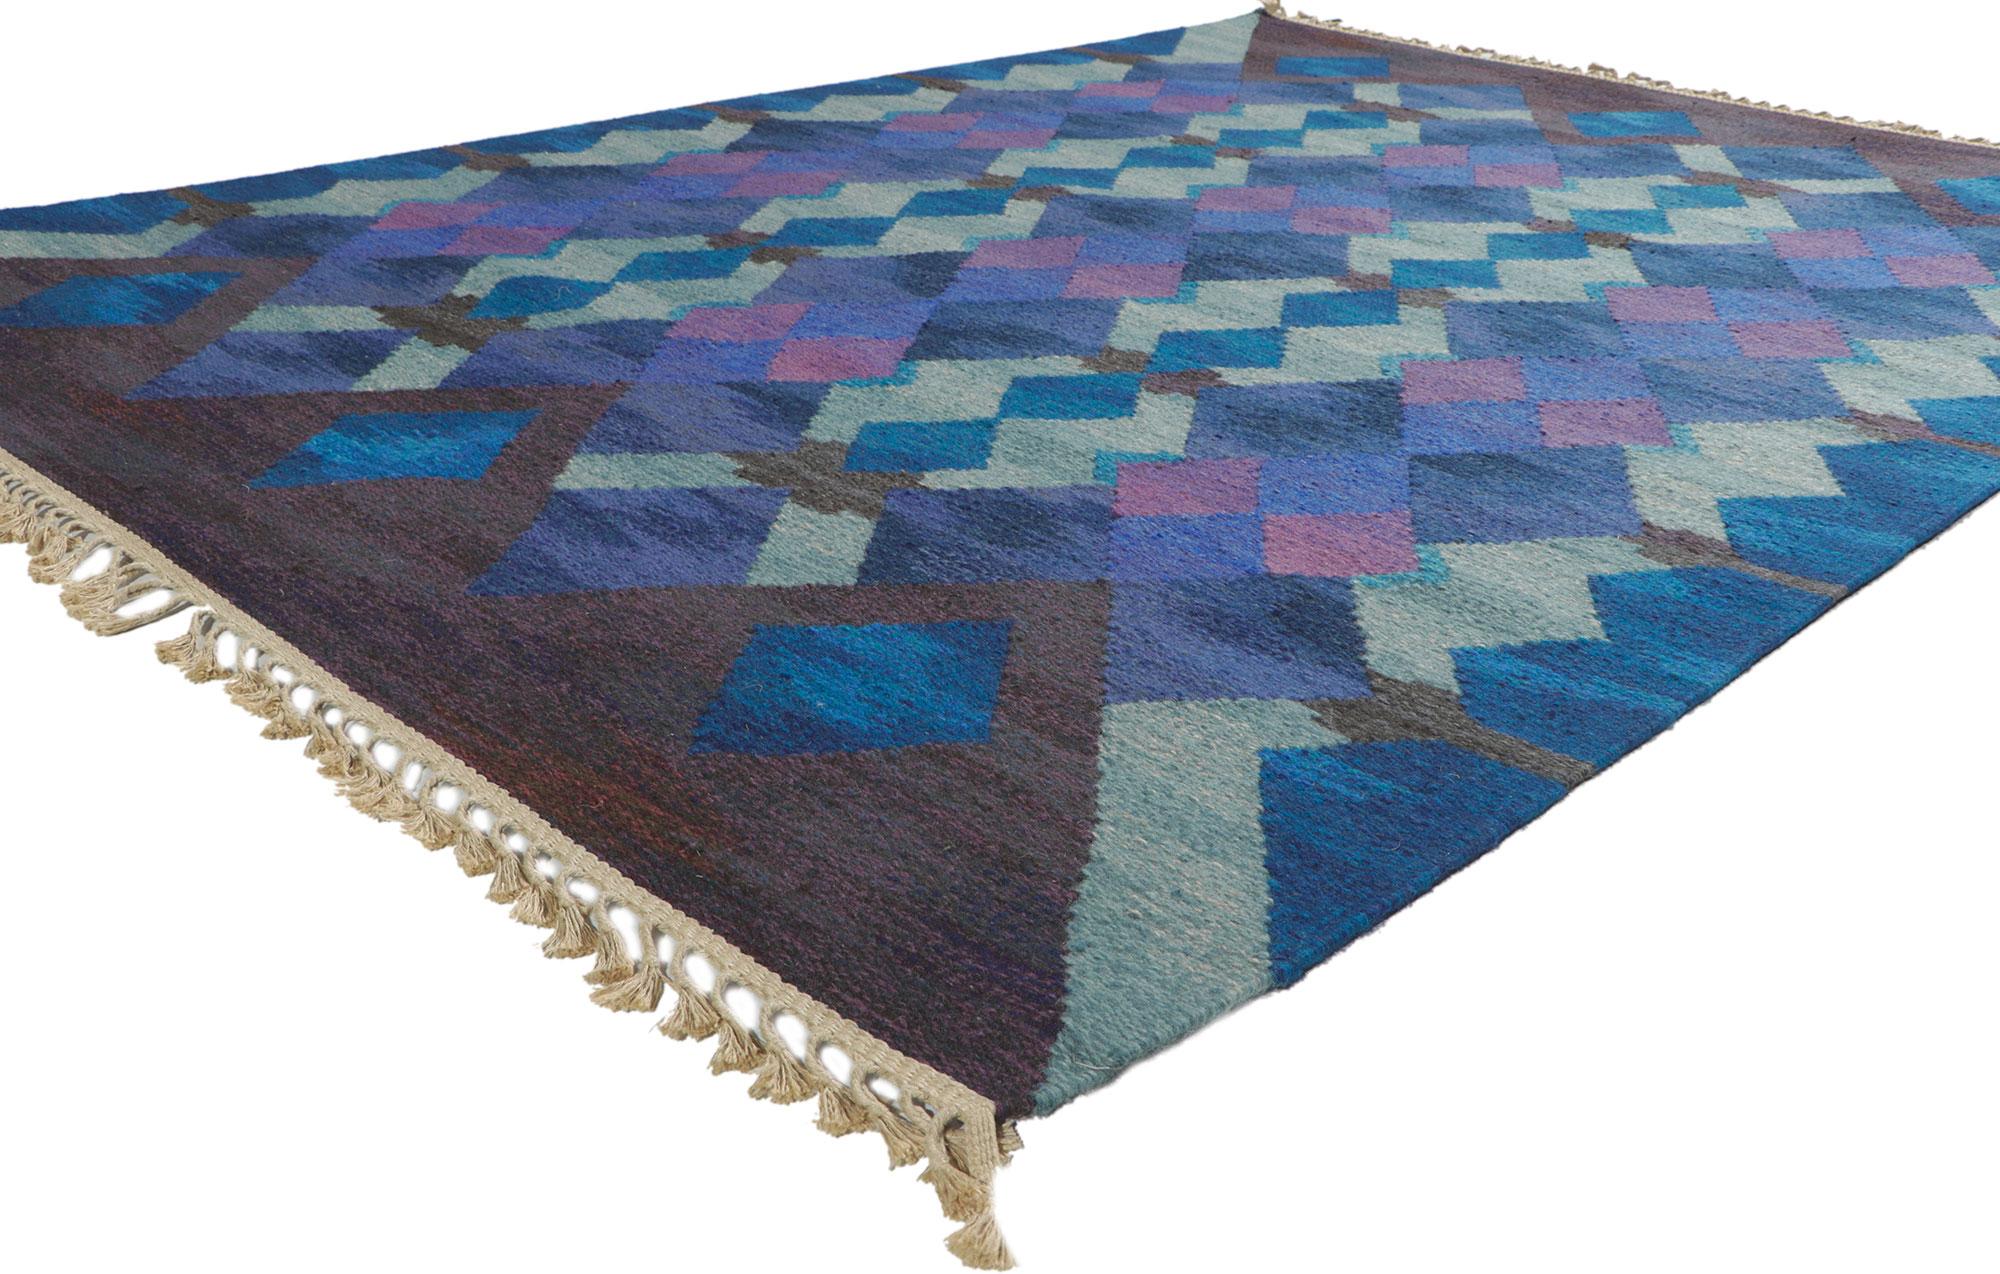 78490 Vintage Swedish Kilim Rollakan rug, measures 06'01 x 08'04.
With its Scandinavian Modern style, incredible detail and texture, this handwoven wool vintage Swedish rollakan rug is a captivating vision of woven beauty. The eye-catching